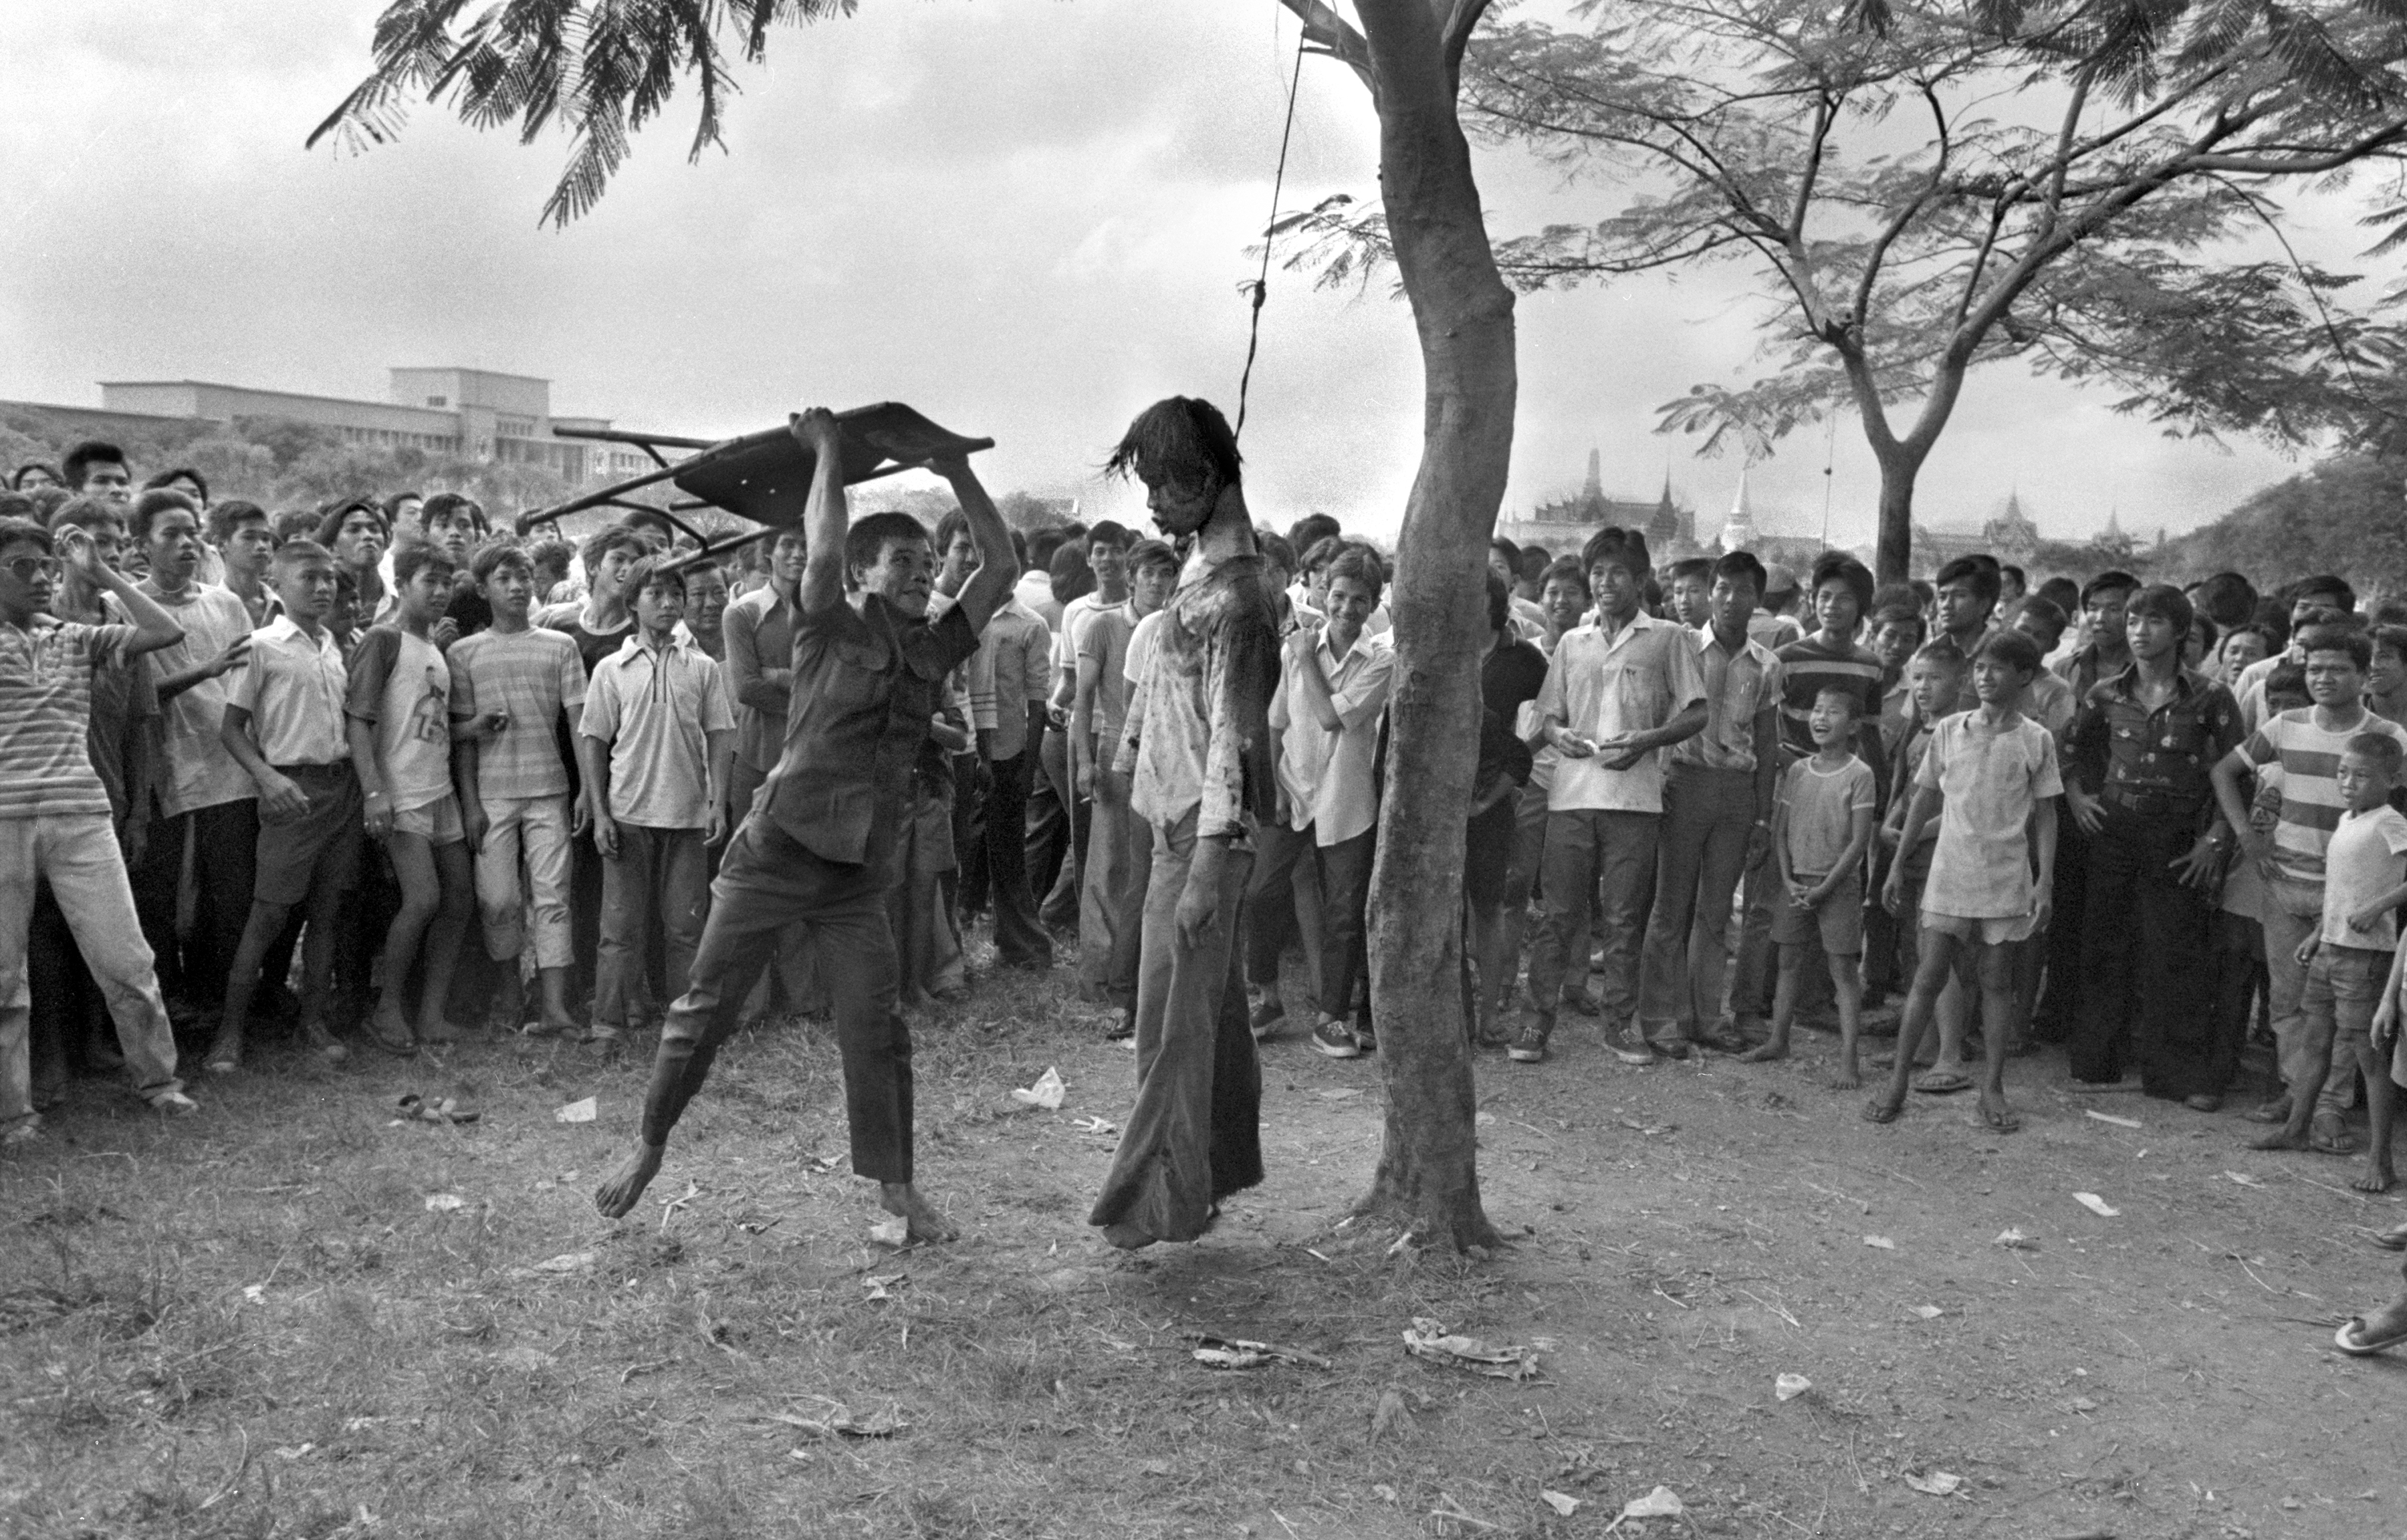 A right-wing supporter strikes the lifeless body of a hanged student outside Thammasat University in Bangkok, Oct. 6, 1976. Police stormed the university after students demanded expulsion of a former military ruler and barricaded themselves in the school. (AP Photo/Neal Ulevich)